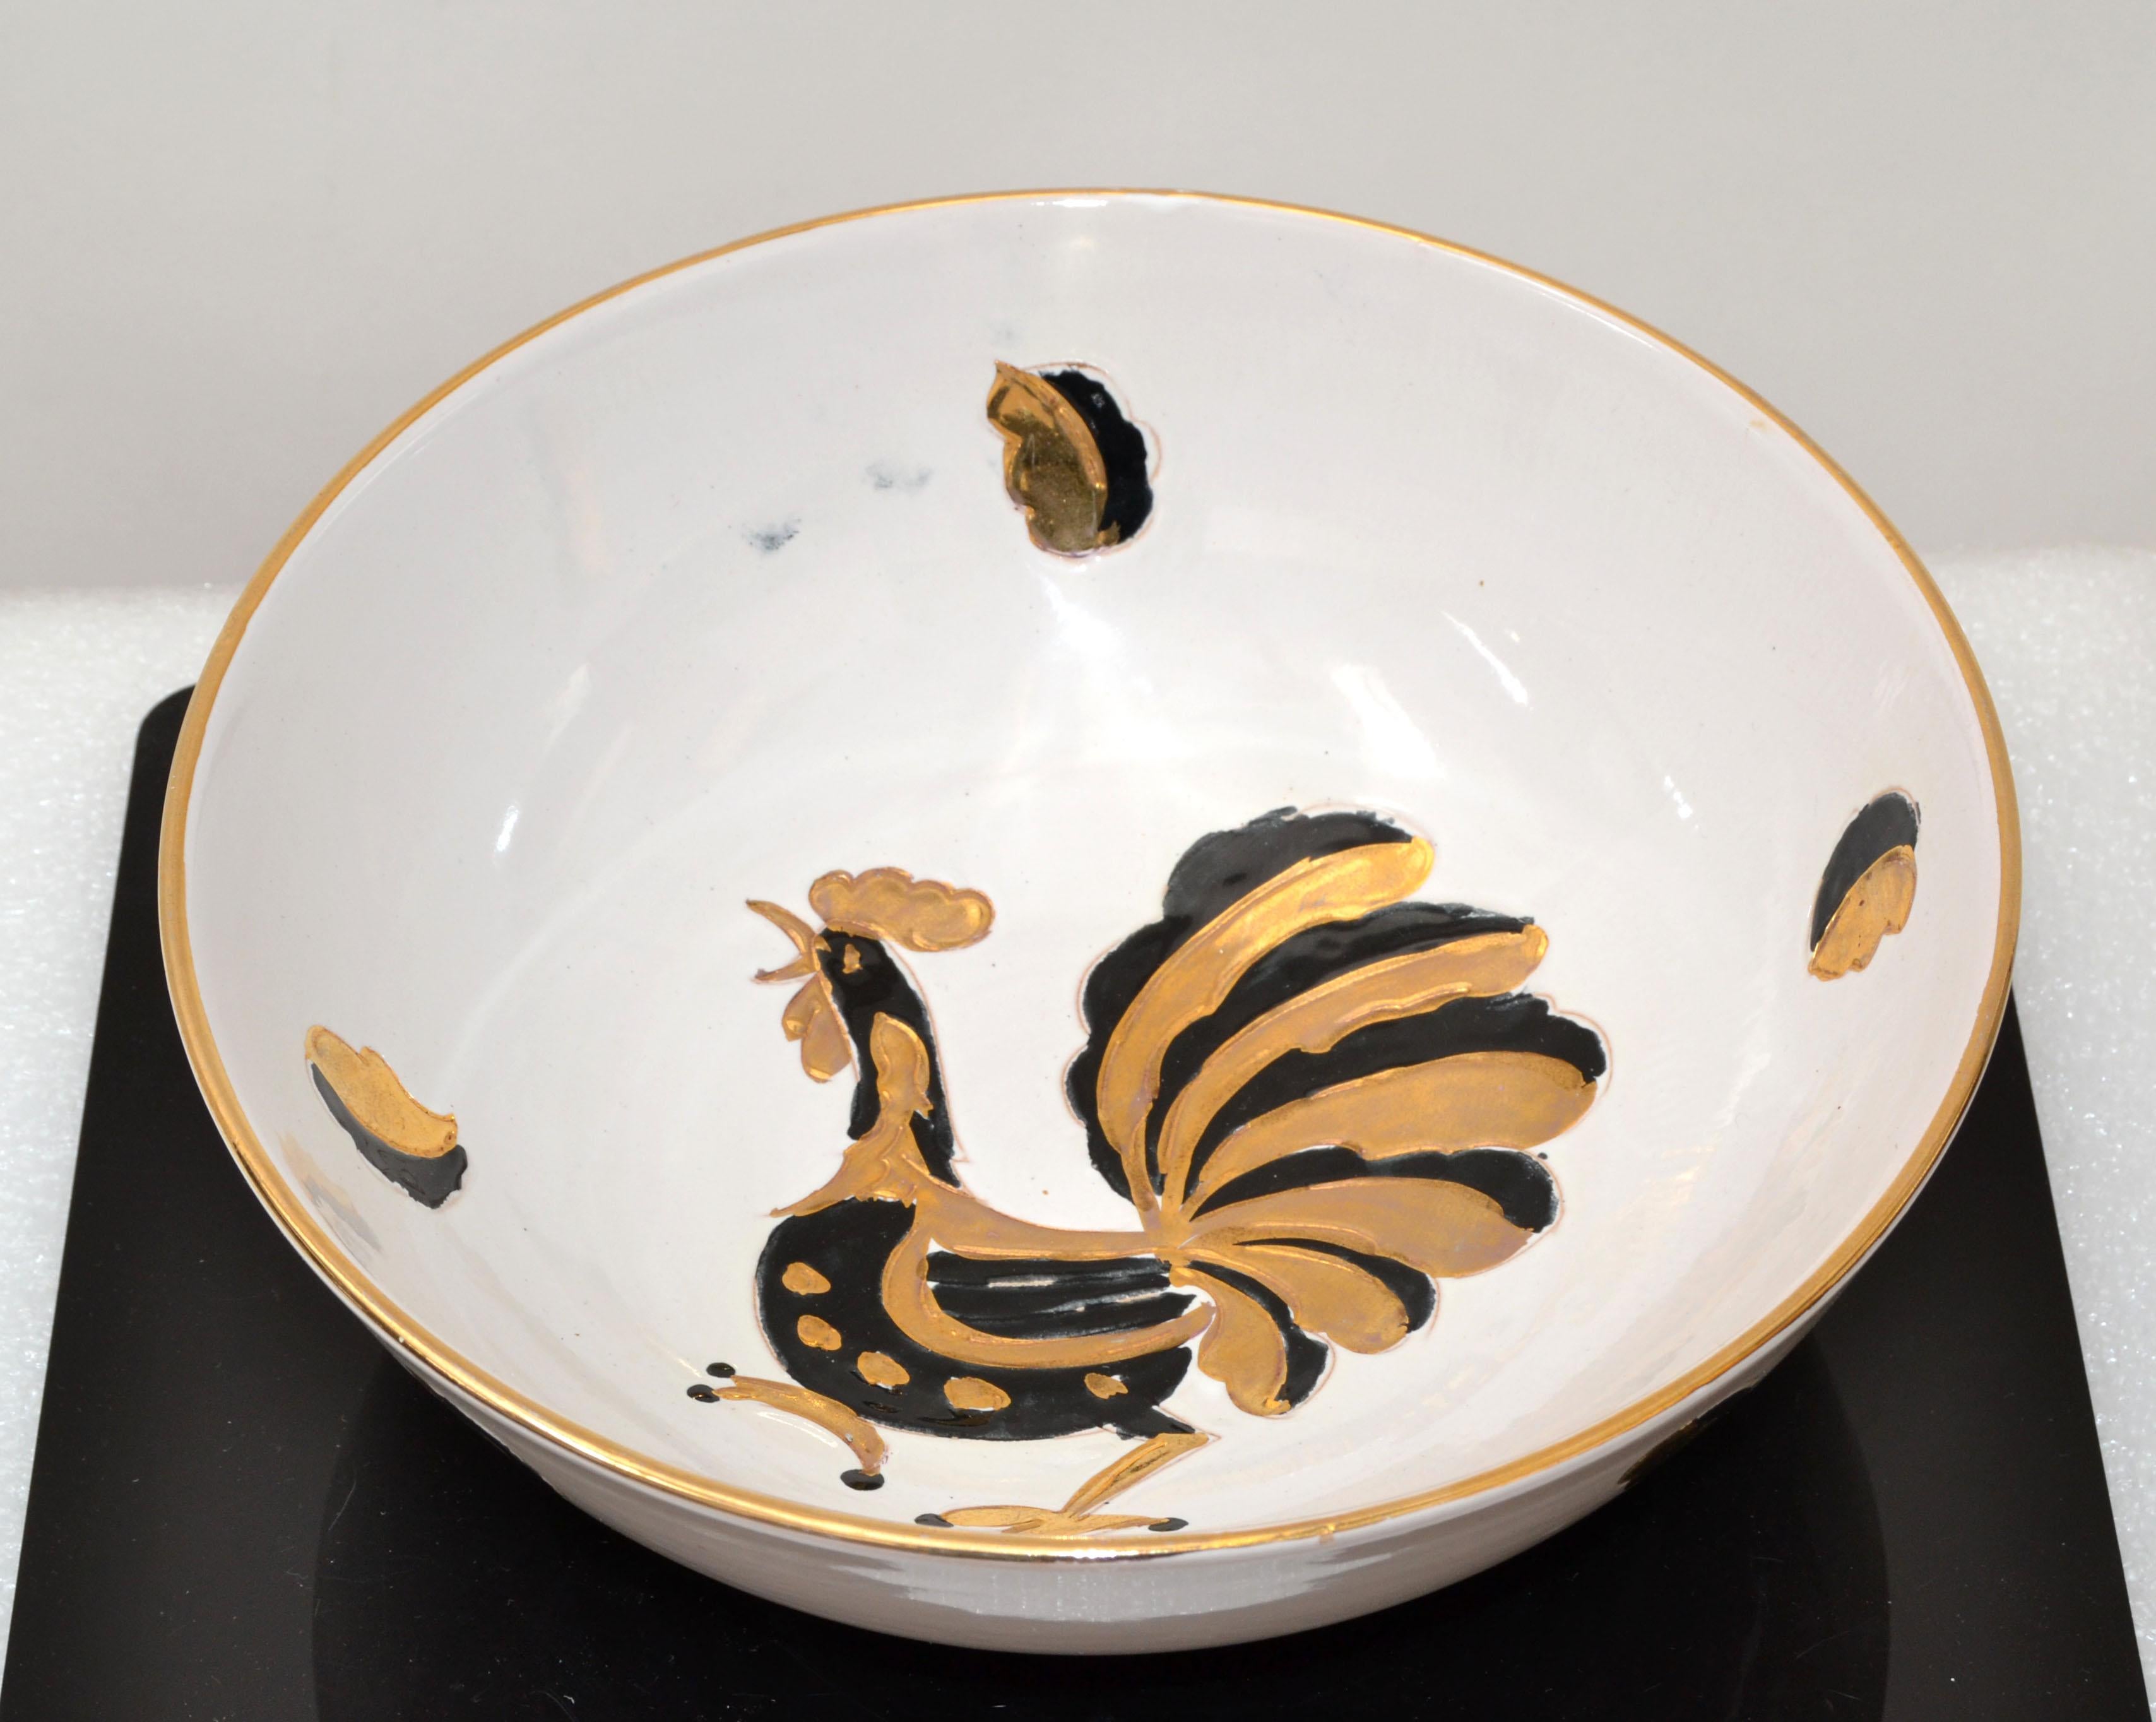 Vintage Italian signed and numbered decorative serving bowl in white ceramic with hand painted Rooster in gold & black.